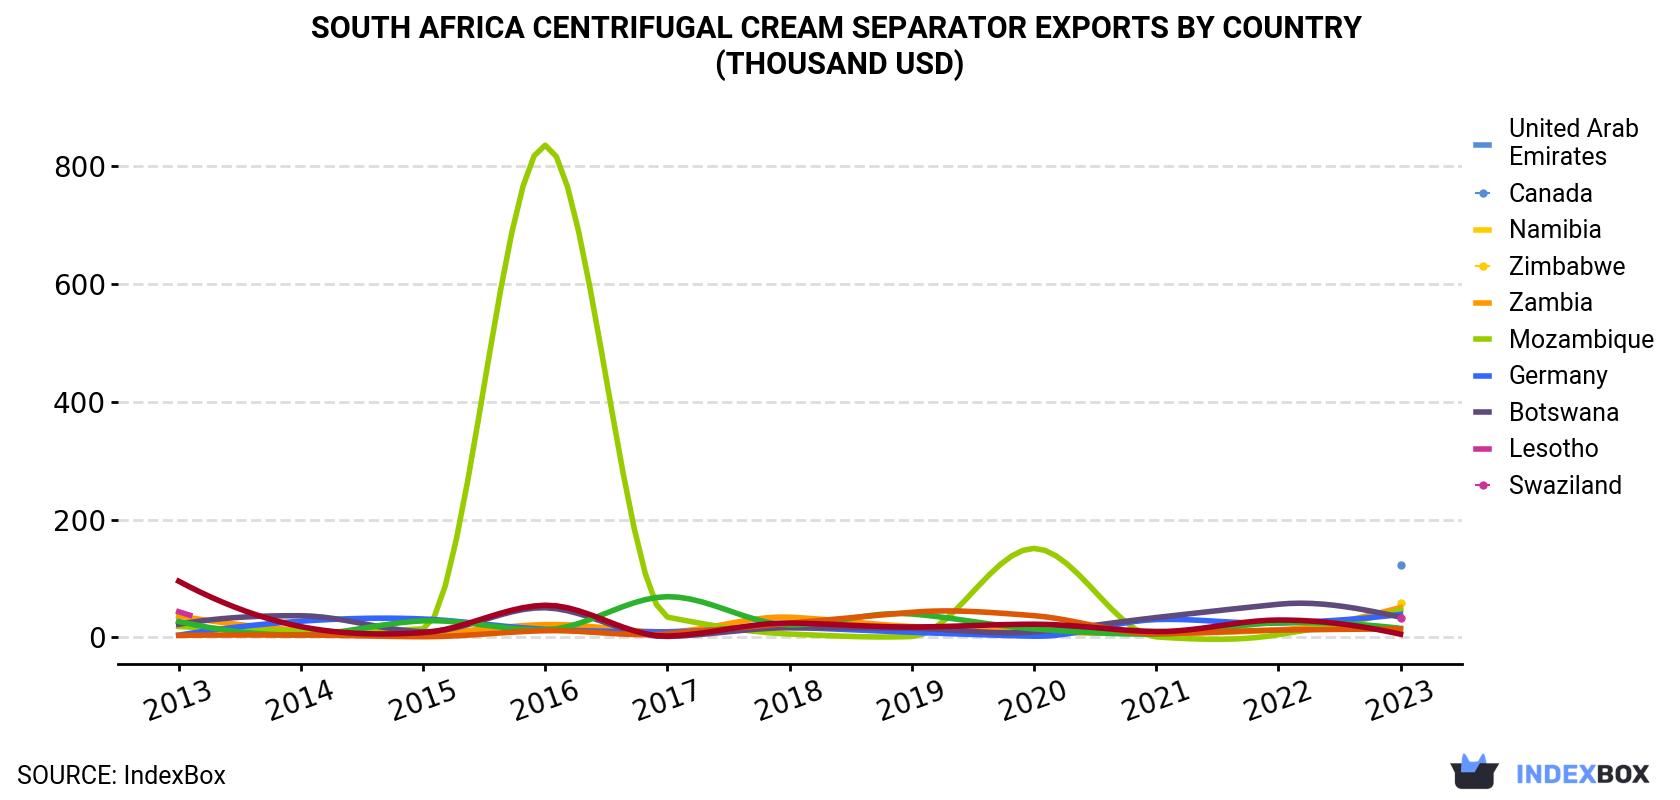 South Africa Centrifugal Cream Separator Exports By Country (Thousand USD)